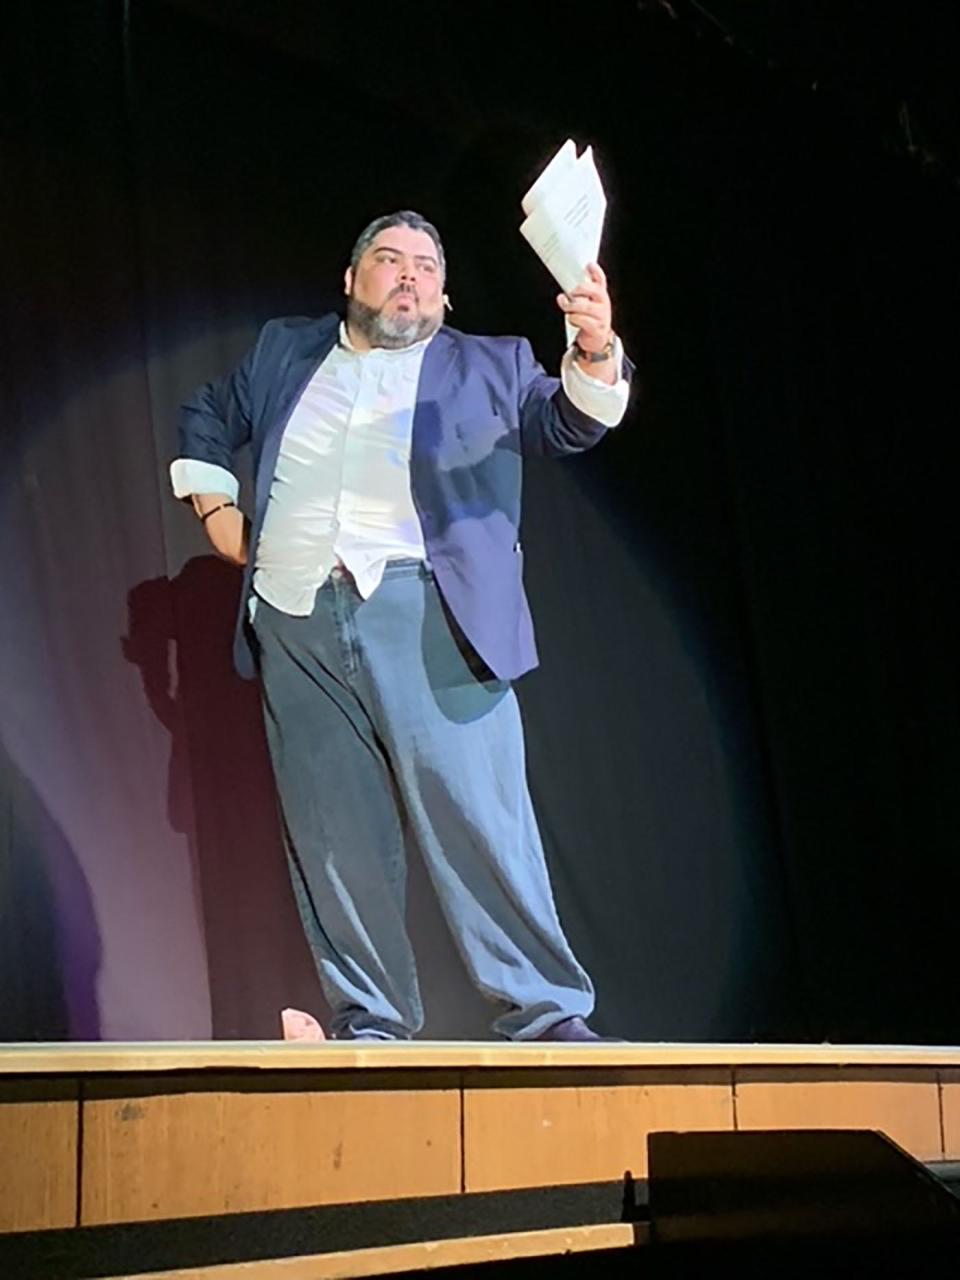 Magician Hansel Kreutzberger dazzled the audience at Saturday's showcase performance at Colon High School, where he poured a quart of milk into a paper funnel. The milk, of course, disappeared and the newsprint was dry.